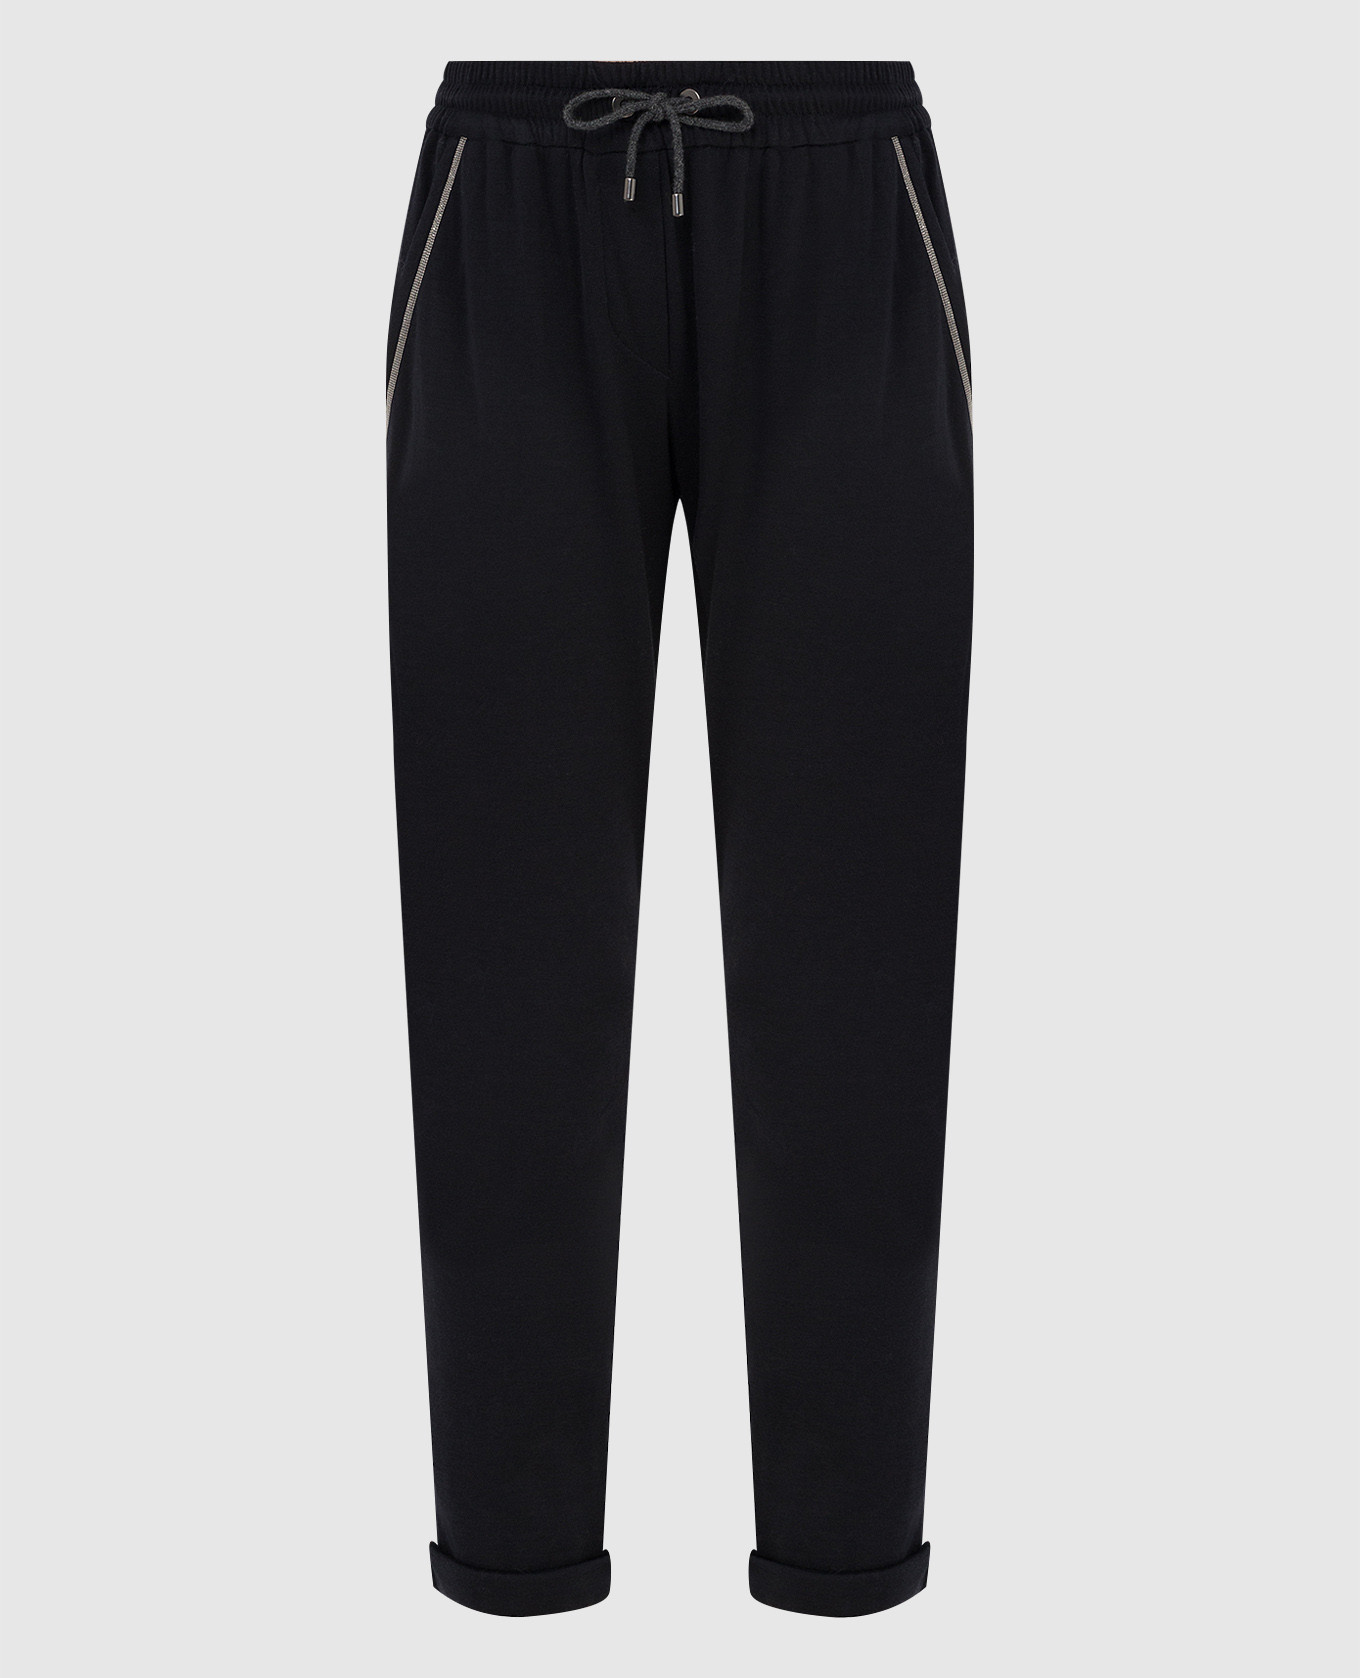 Charcoal Sweatpants with Chains